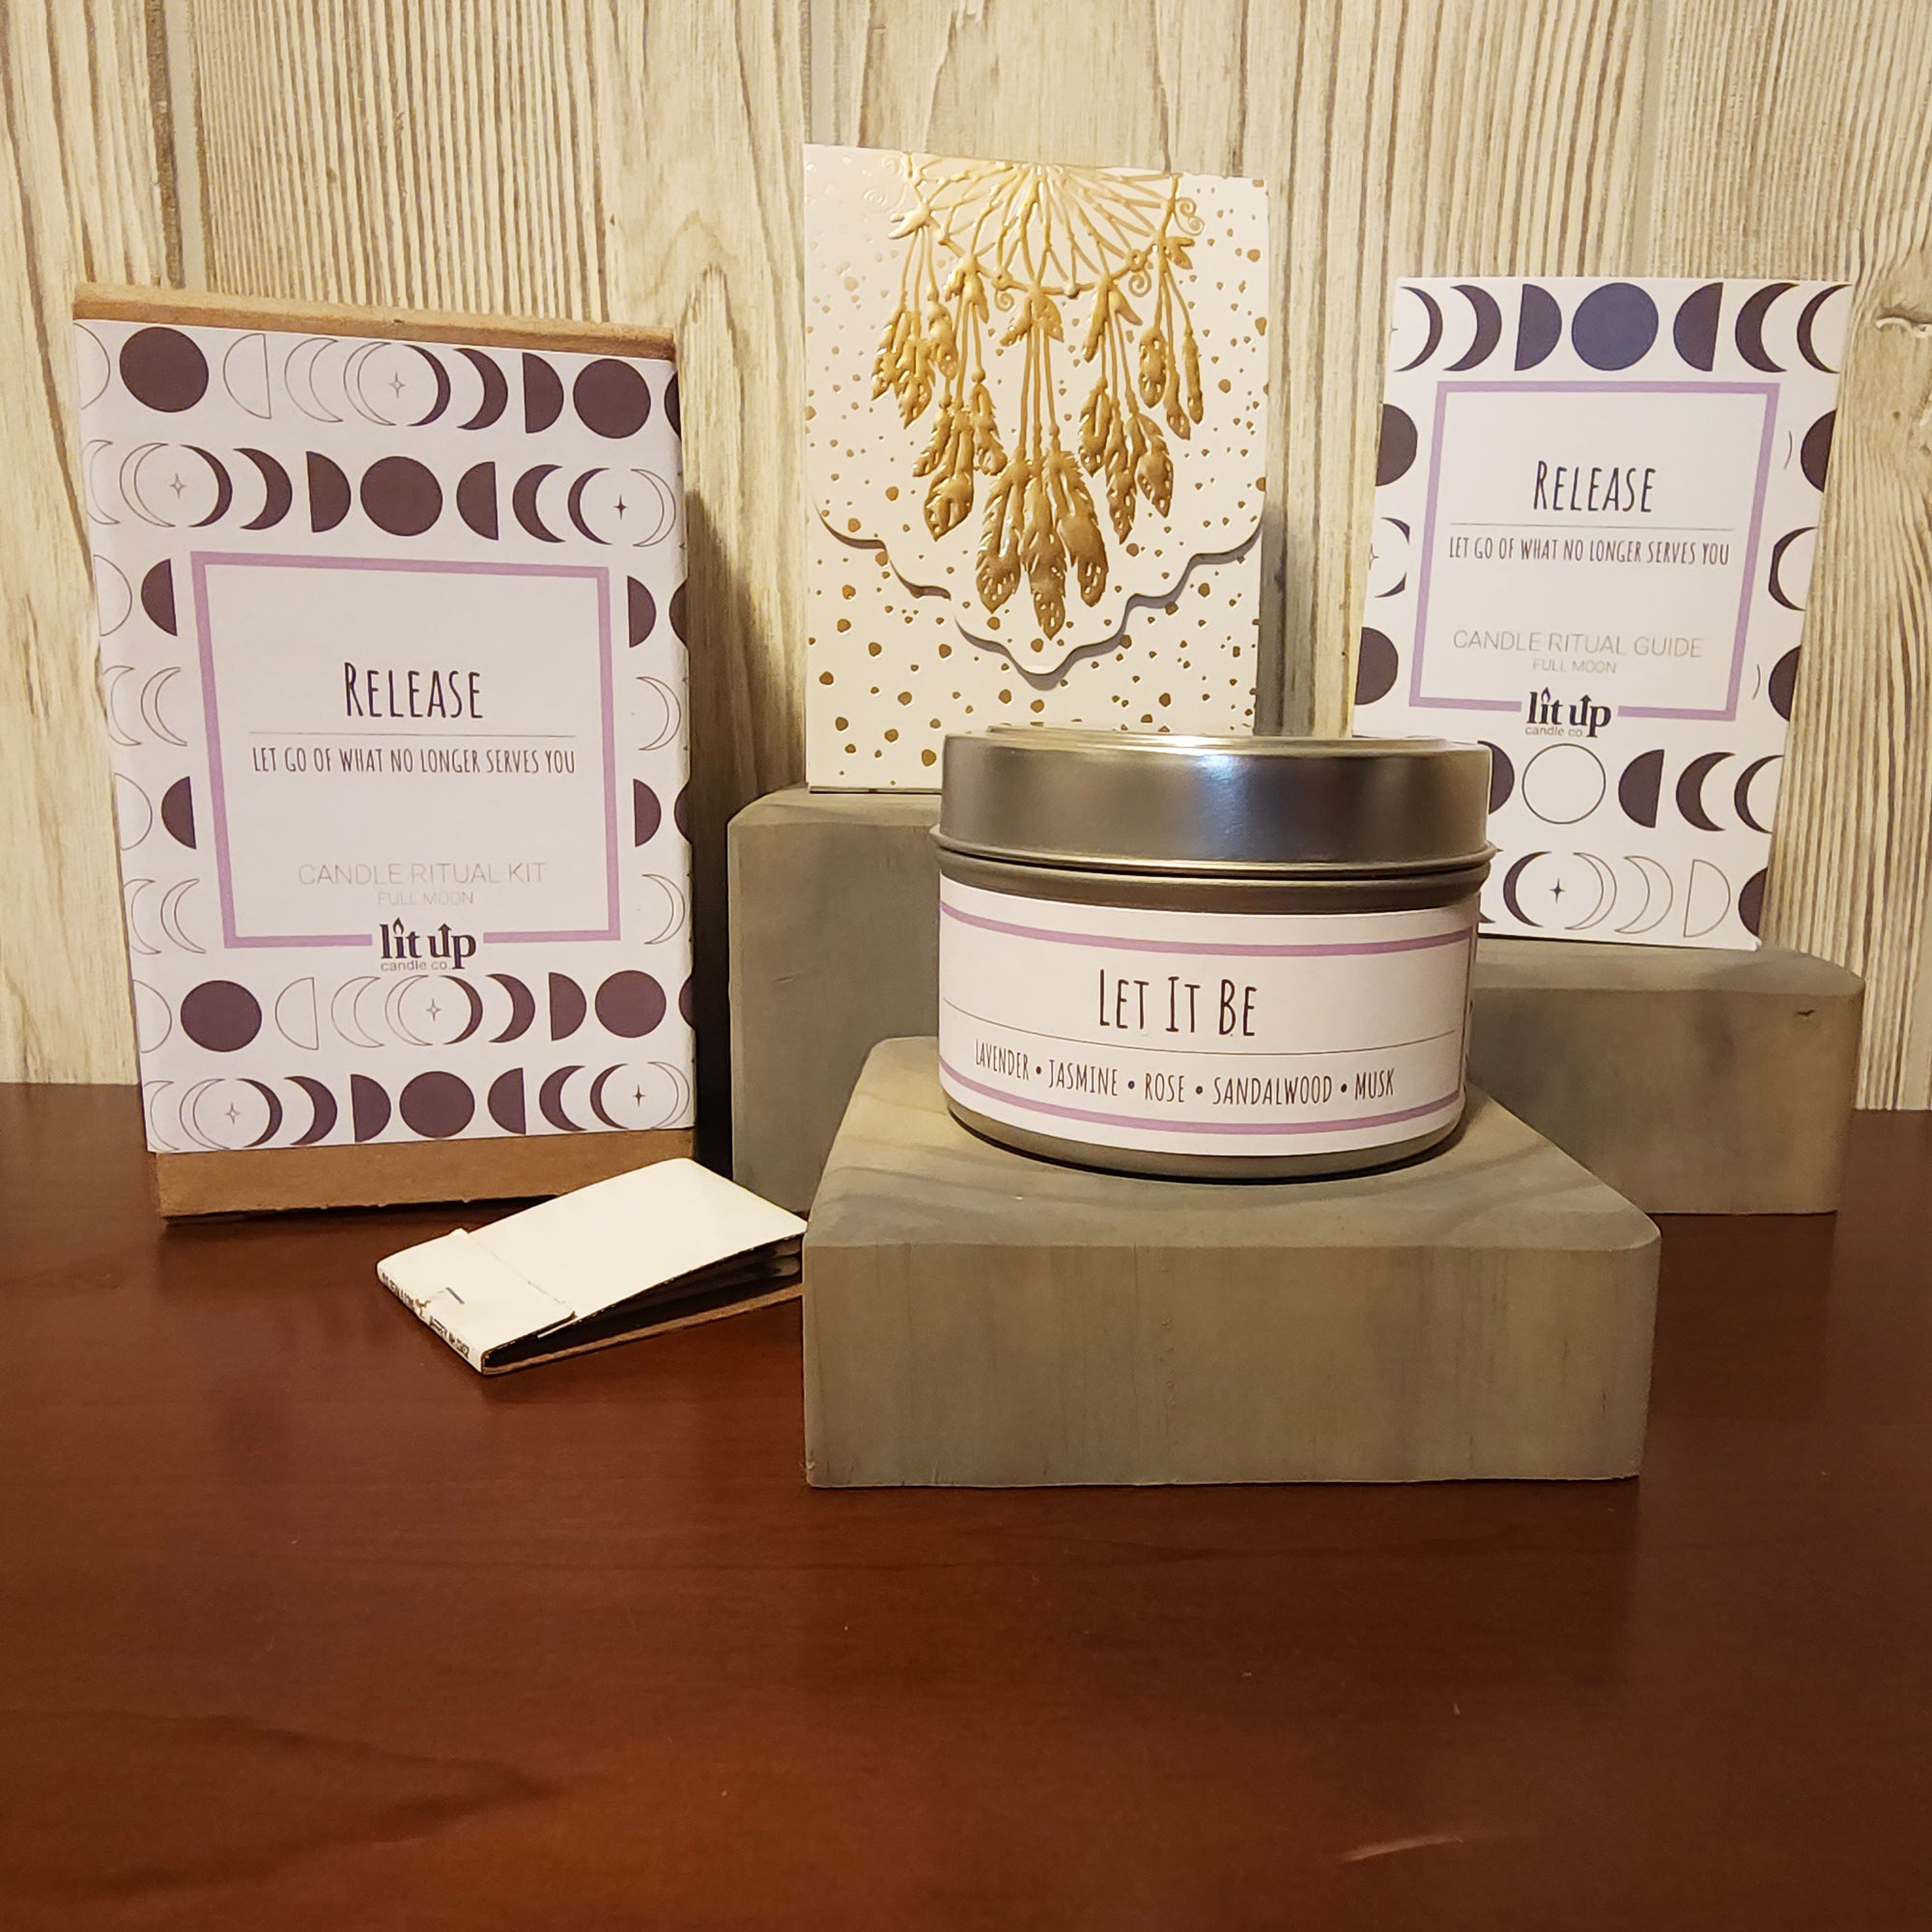 Full Moon Candle Ritual Kit to Release What No Longer Serves You | Lit Up Candle Co.